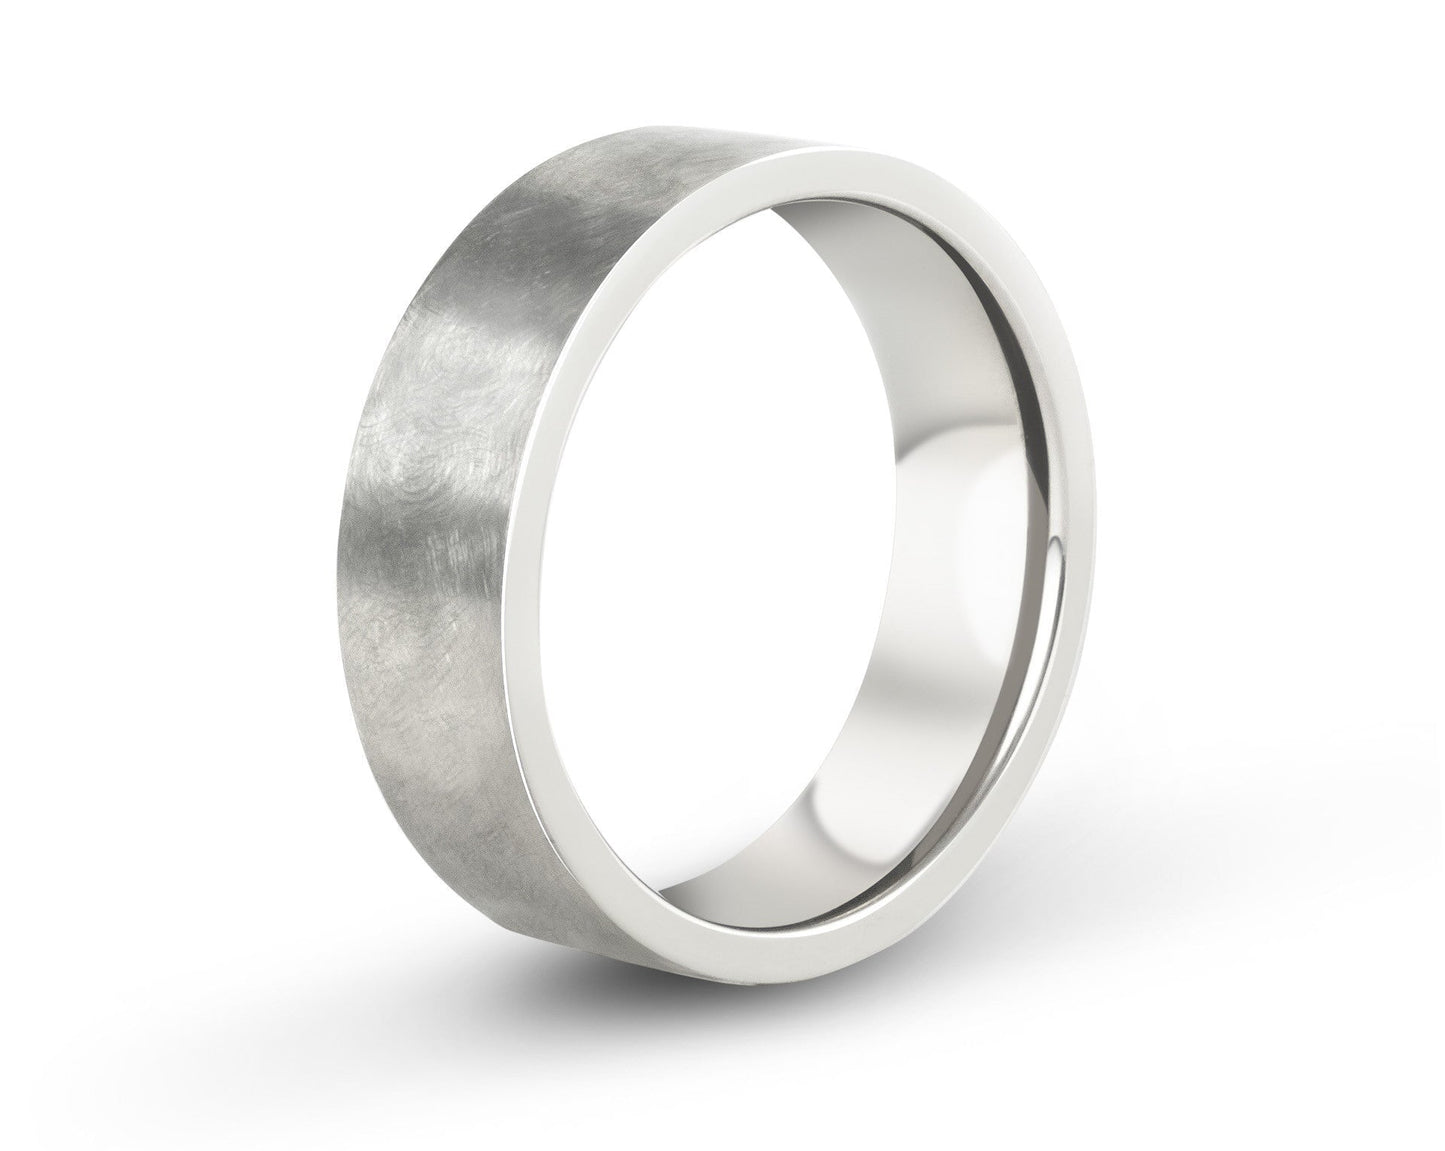 Distressed finish "Brüns" titanium ring with polished interior